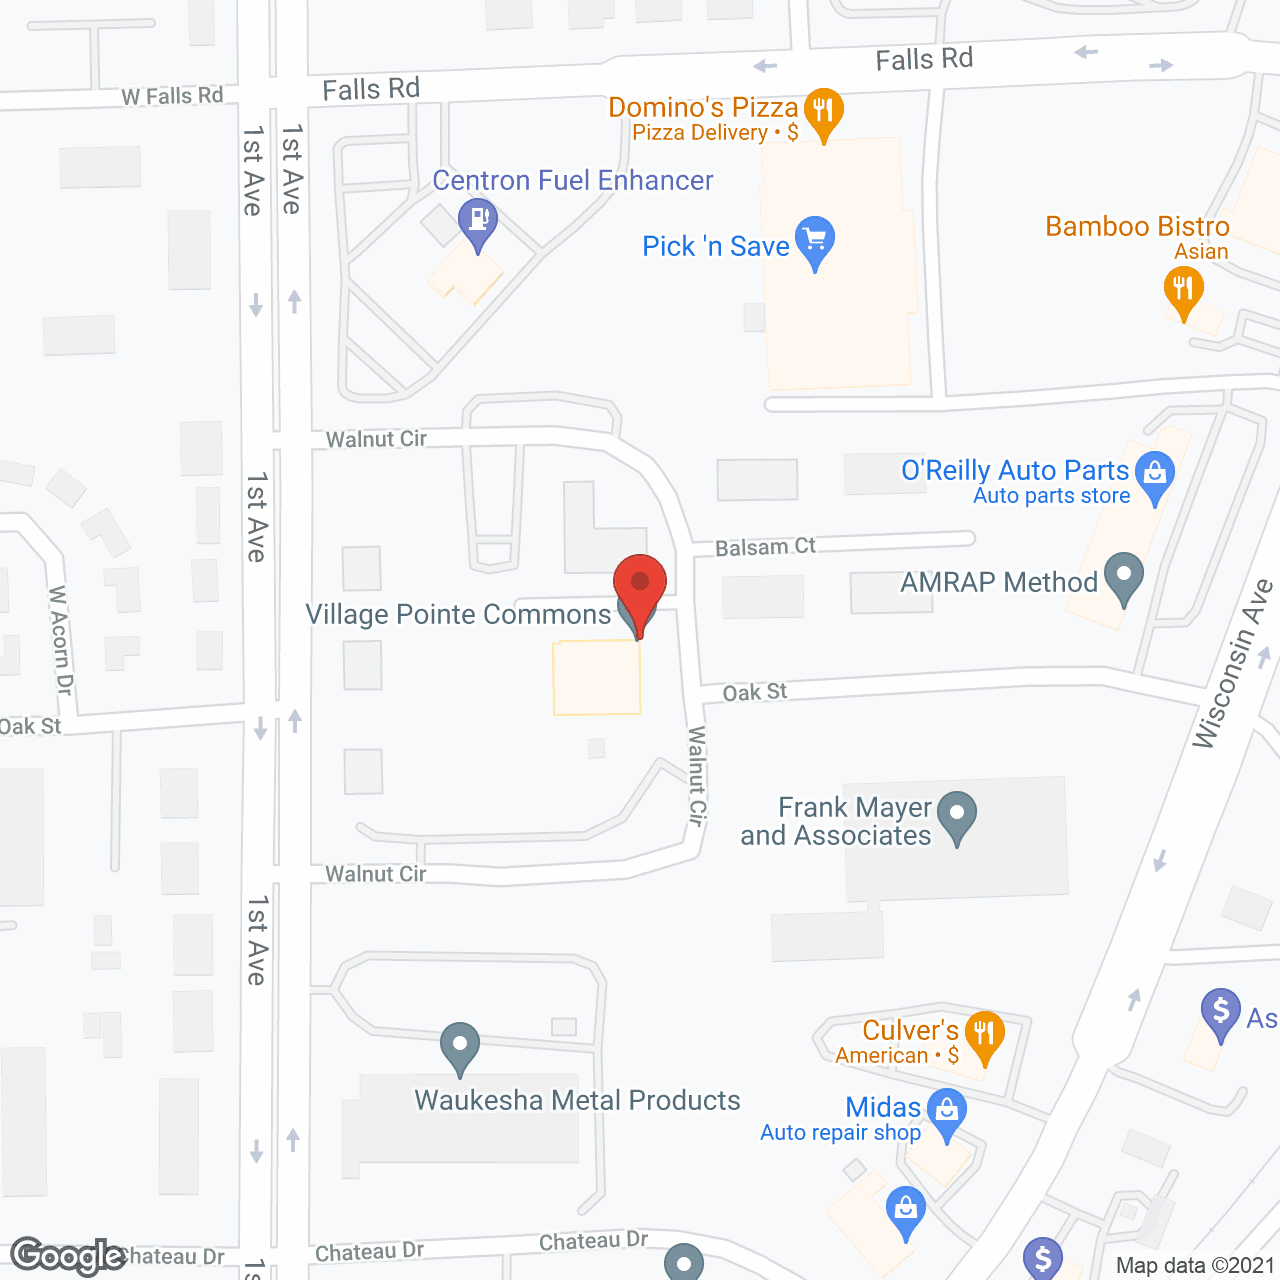 Village Pointe Commons in google map